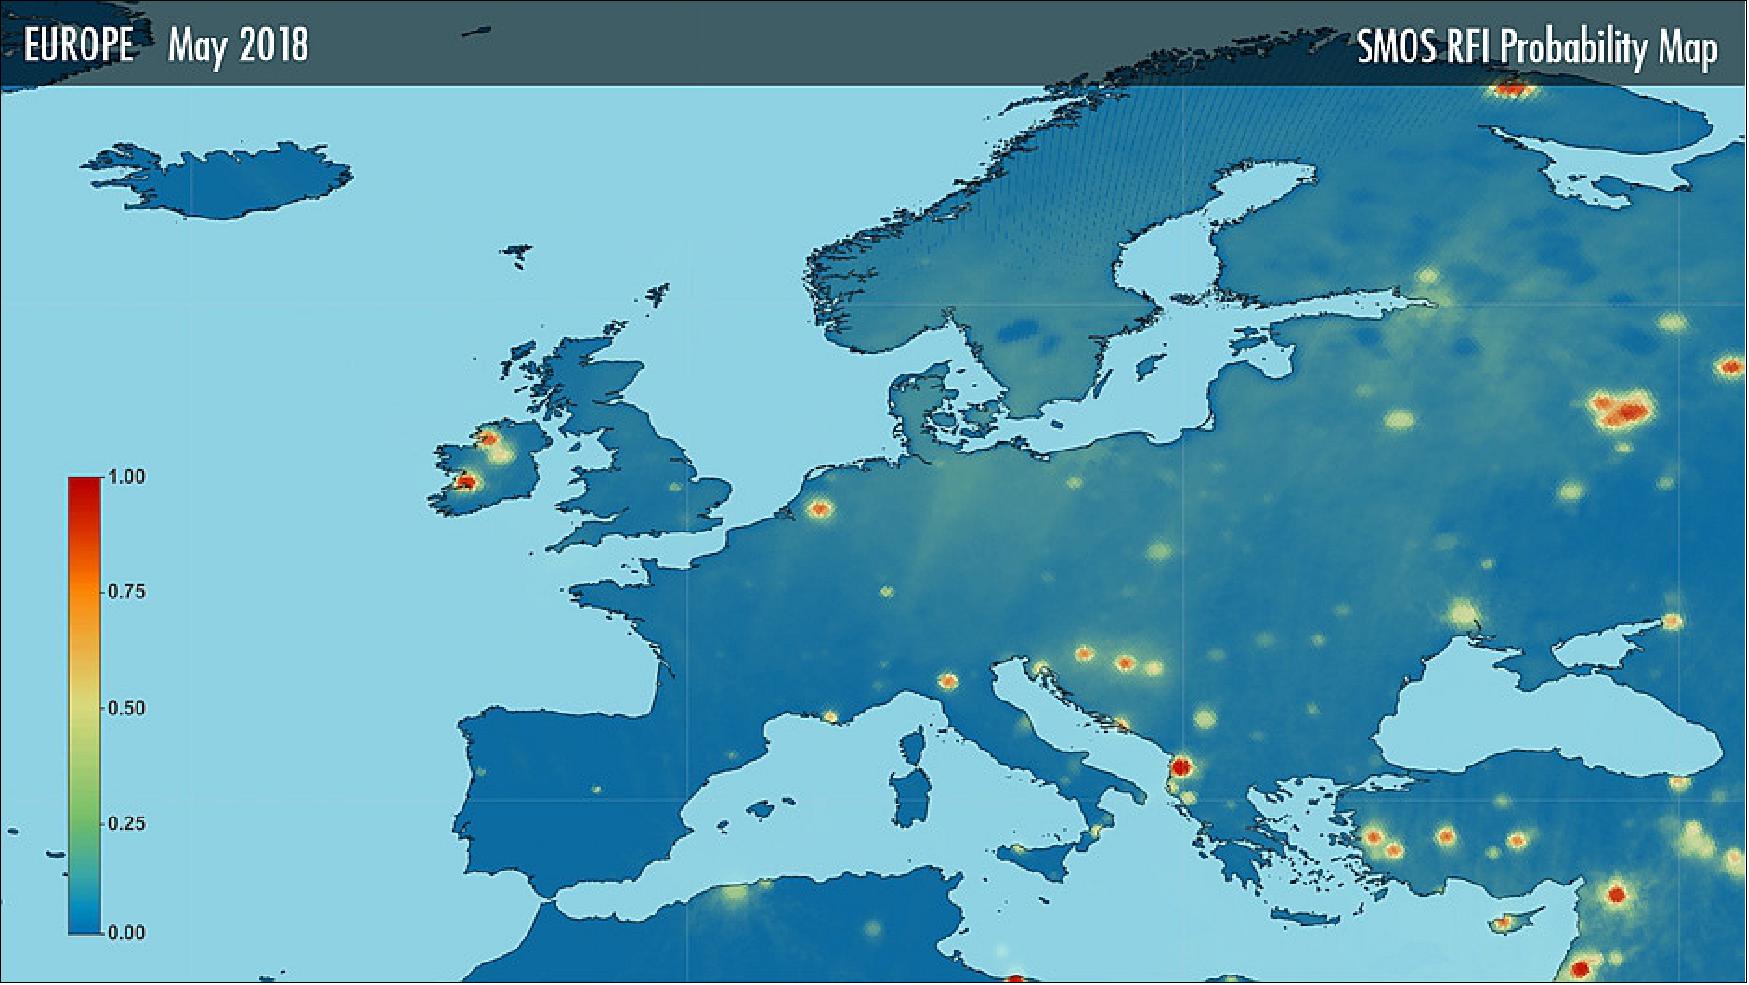 Figure 43: Map of Europe showing the probability of SMOS persistent RFI occurrences during the period 17-31 May 2018 (image credit: SMOS RFI team at ESA/ESAC)